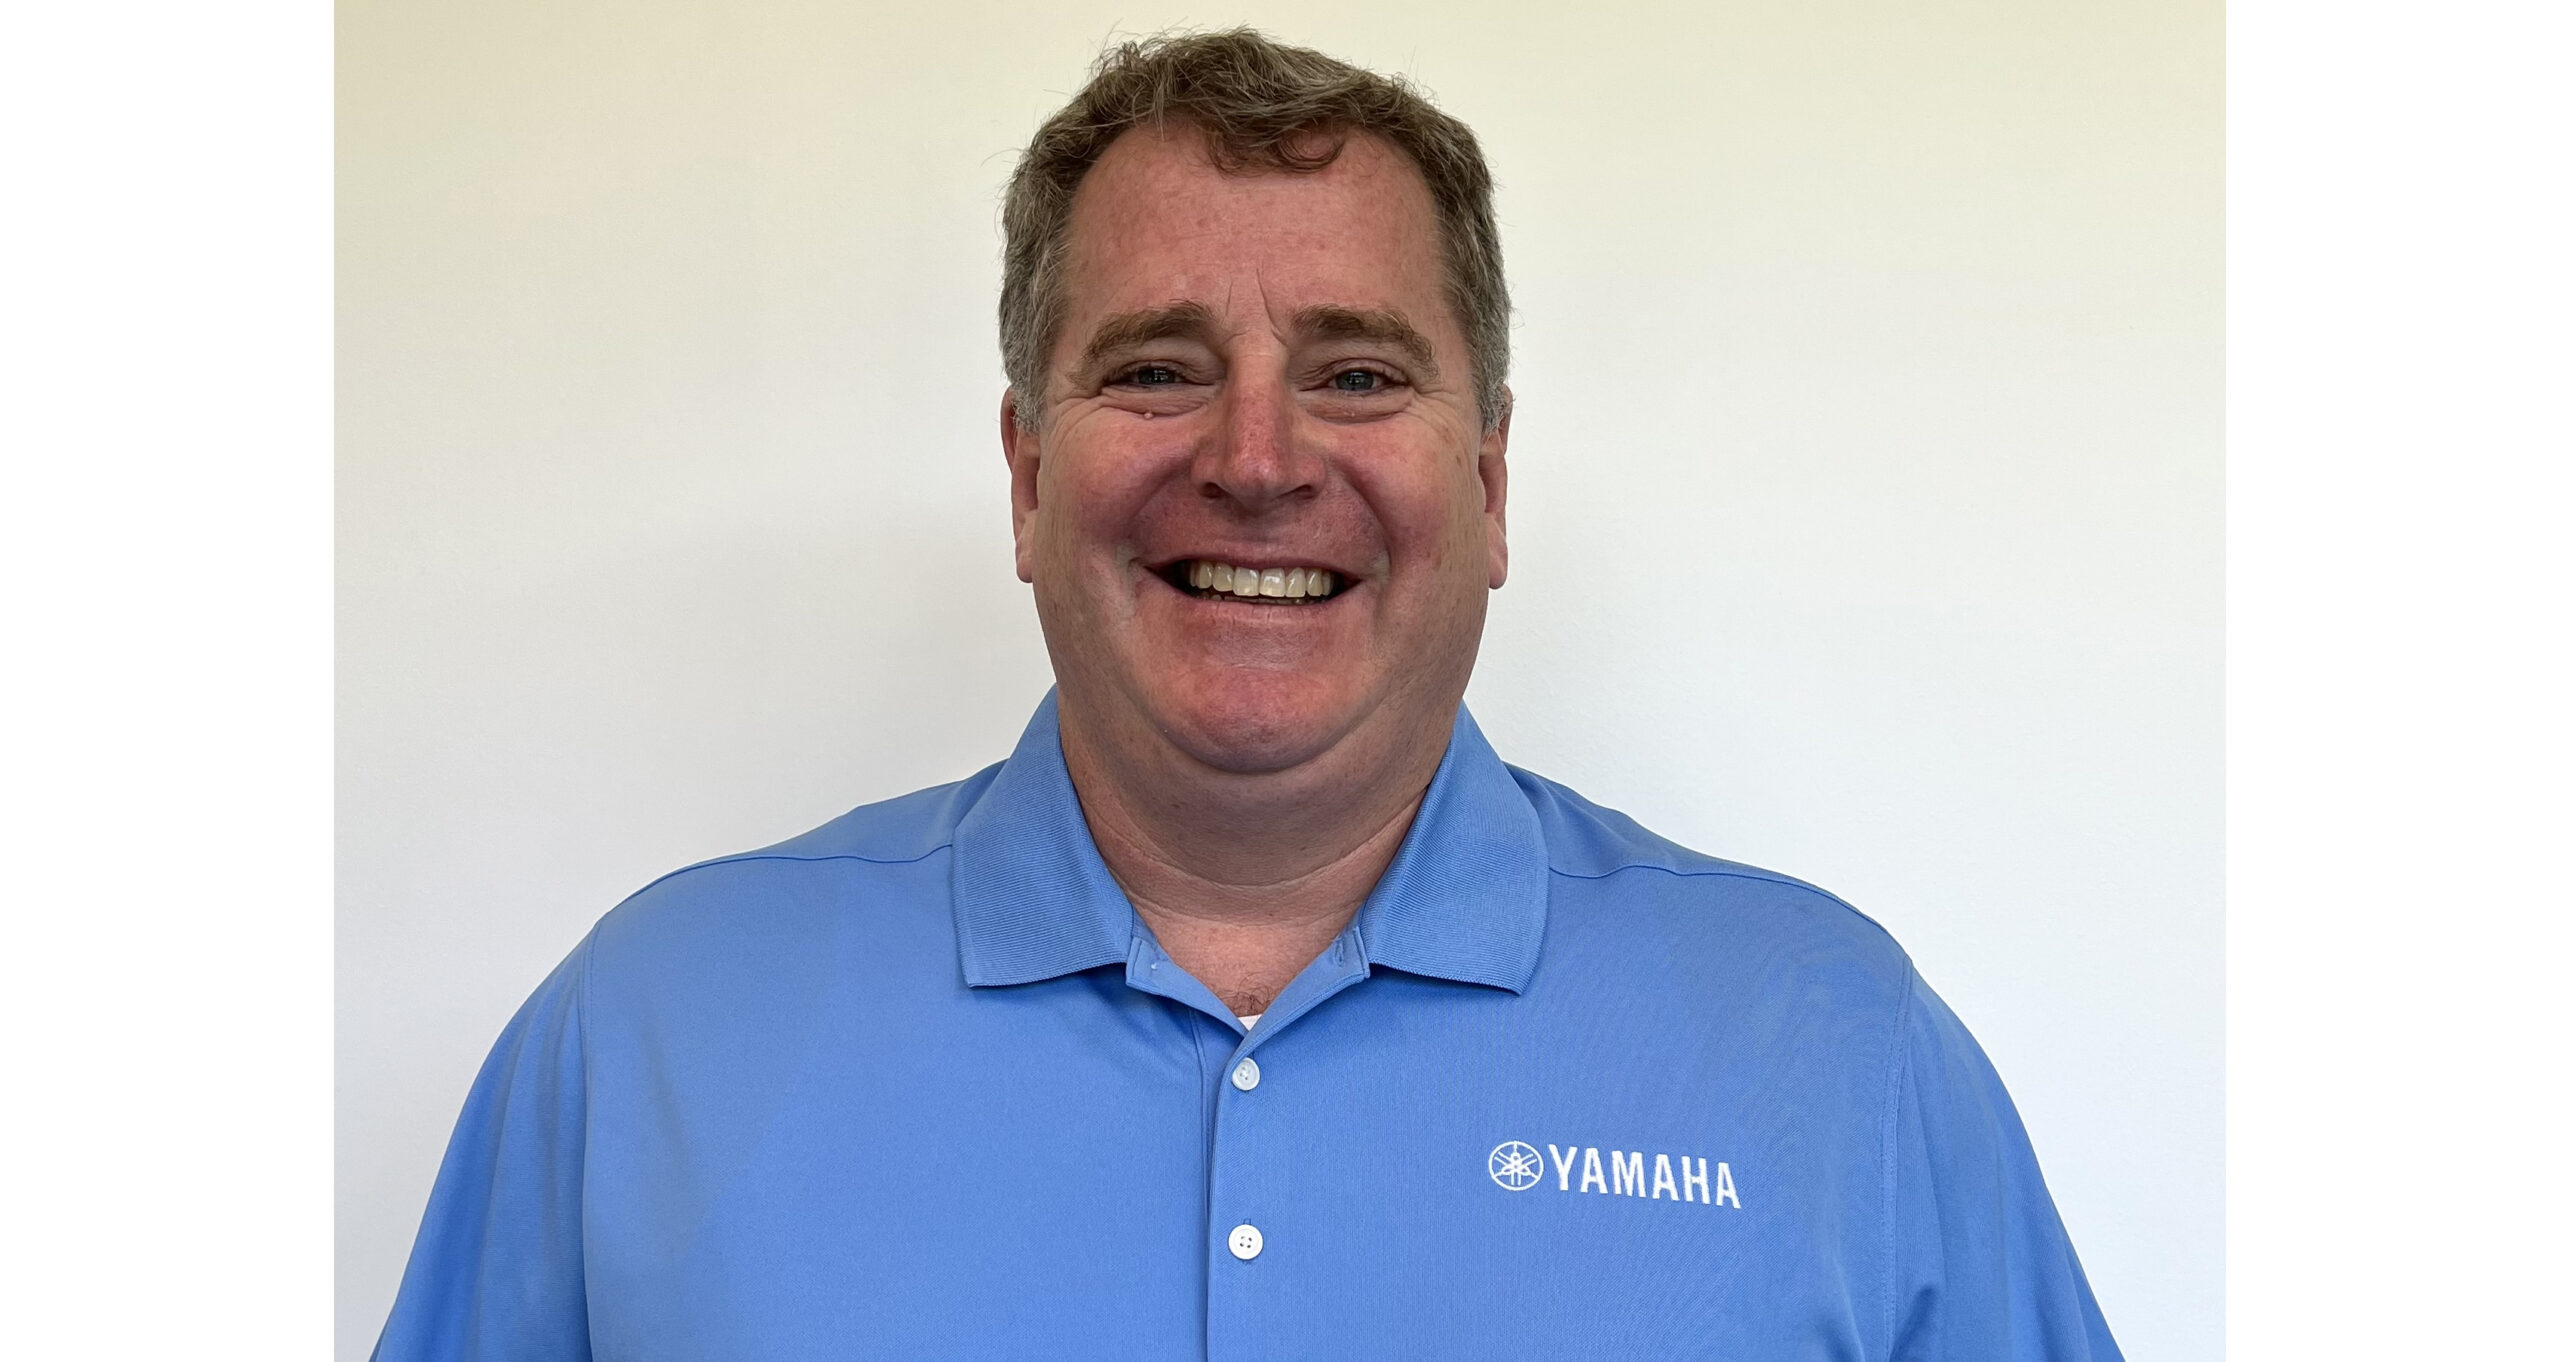 Robert Orr is named Marine Technical Services Manager, Yamaha Marine Service Operations Division